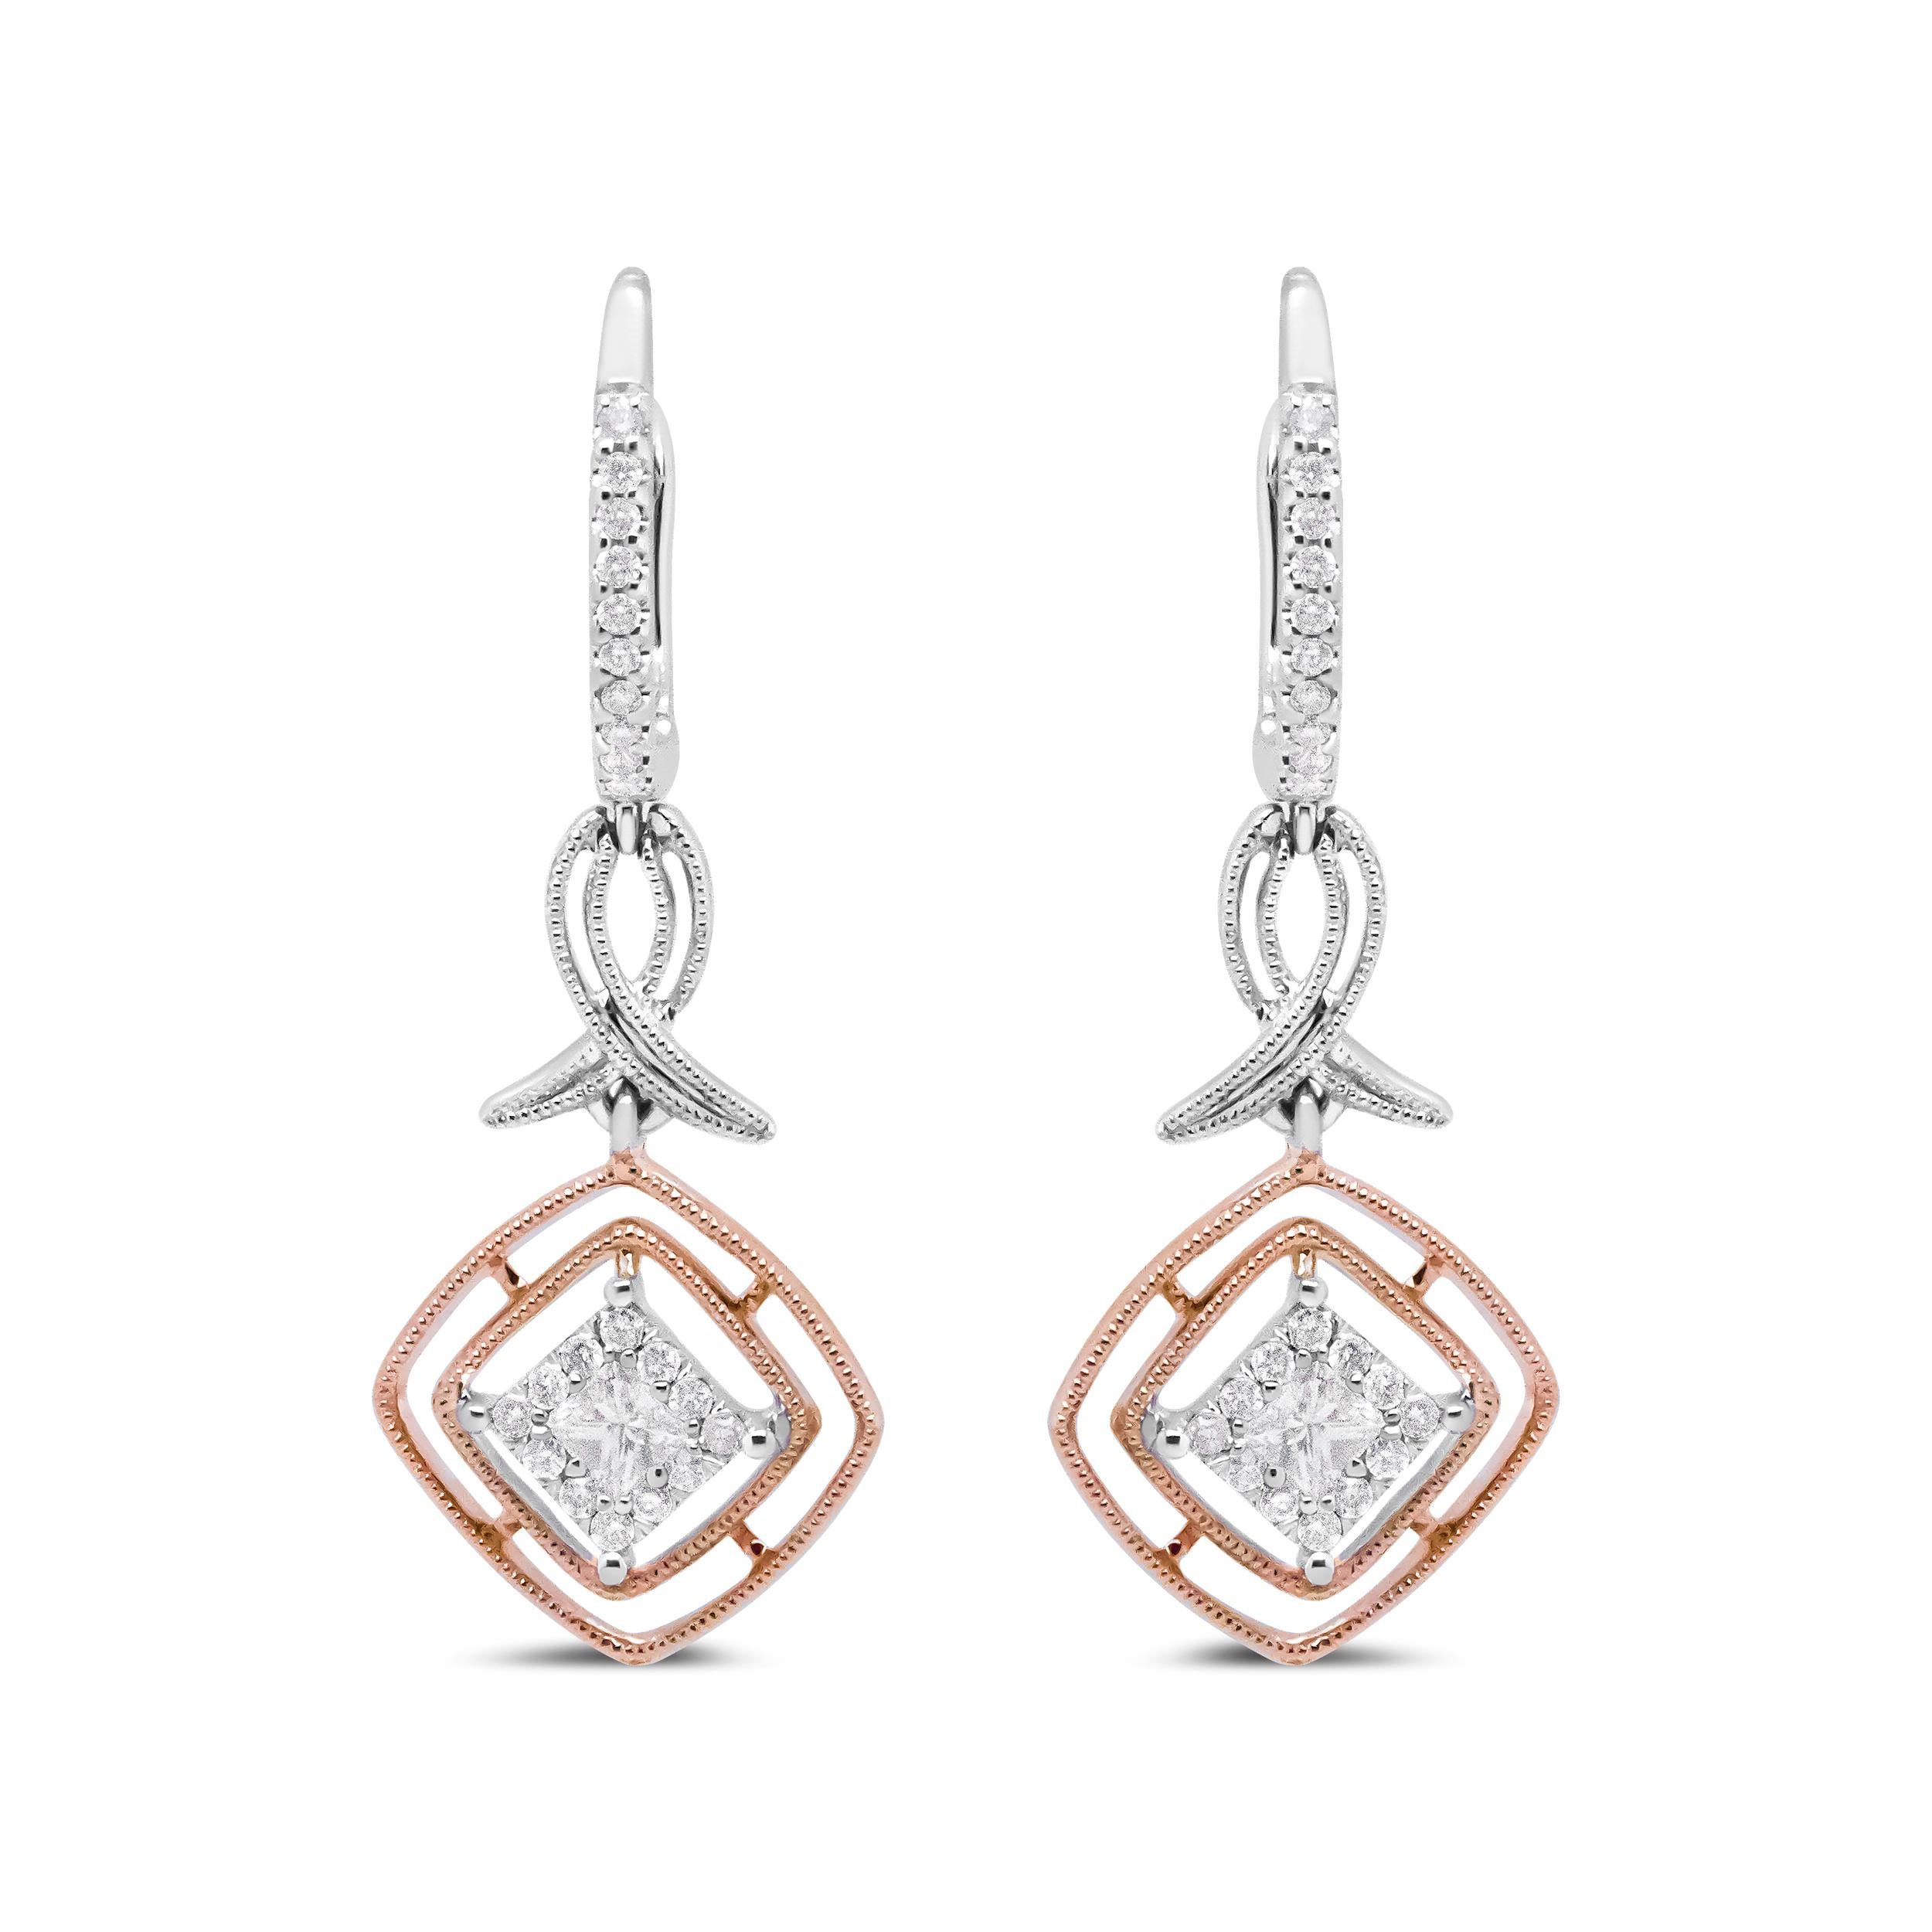 These two-tone diamond dangle earrings are so unique and refreshing, crafted from genuine 14k white and rose gold. This piece starts with an upper dangle which is set with round white diamonds in prong settings. The middle dangle is a ribbon